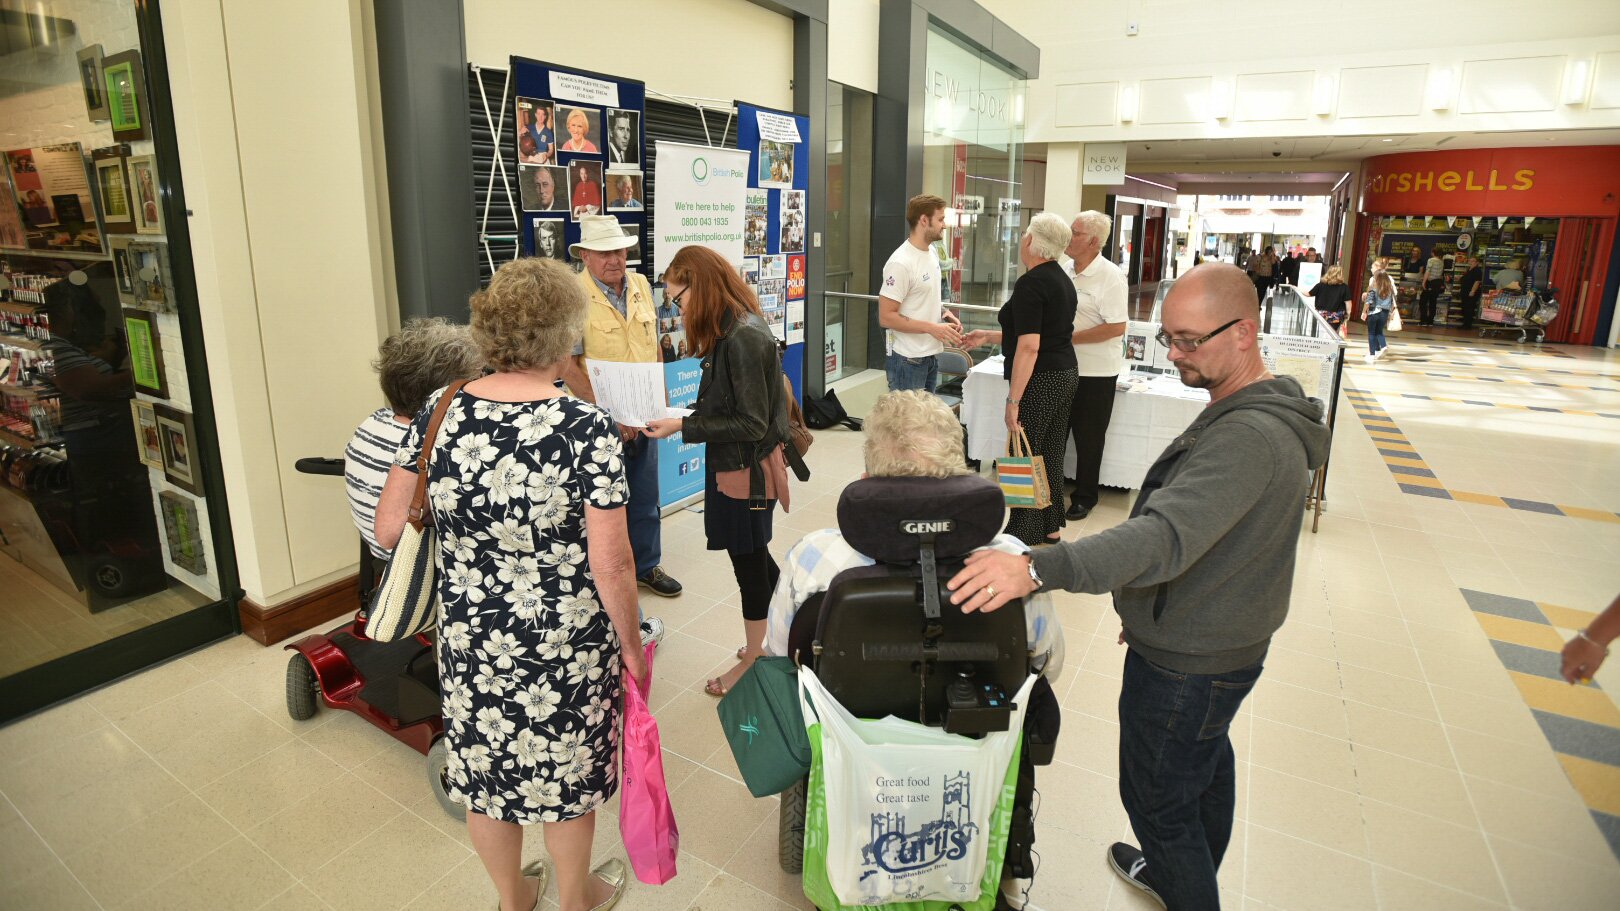 James met people at Waterside Shopping centre to talk about his career and life with Polio. 